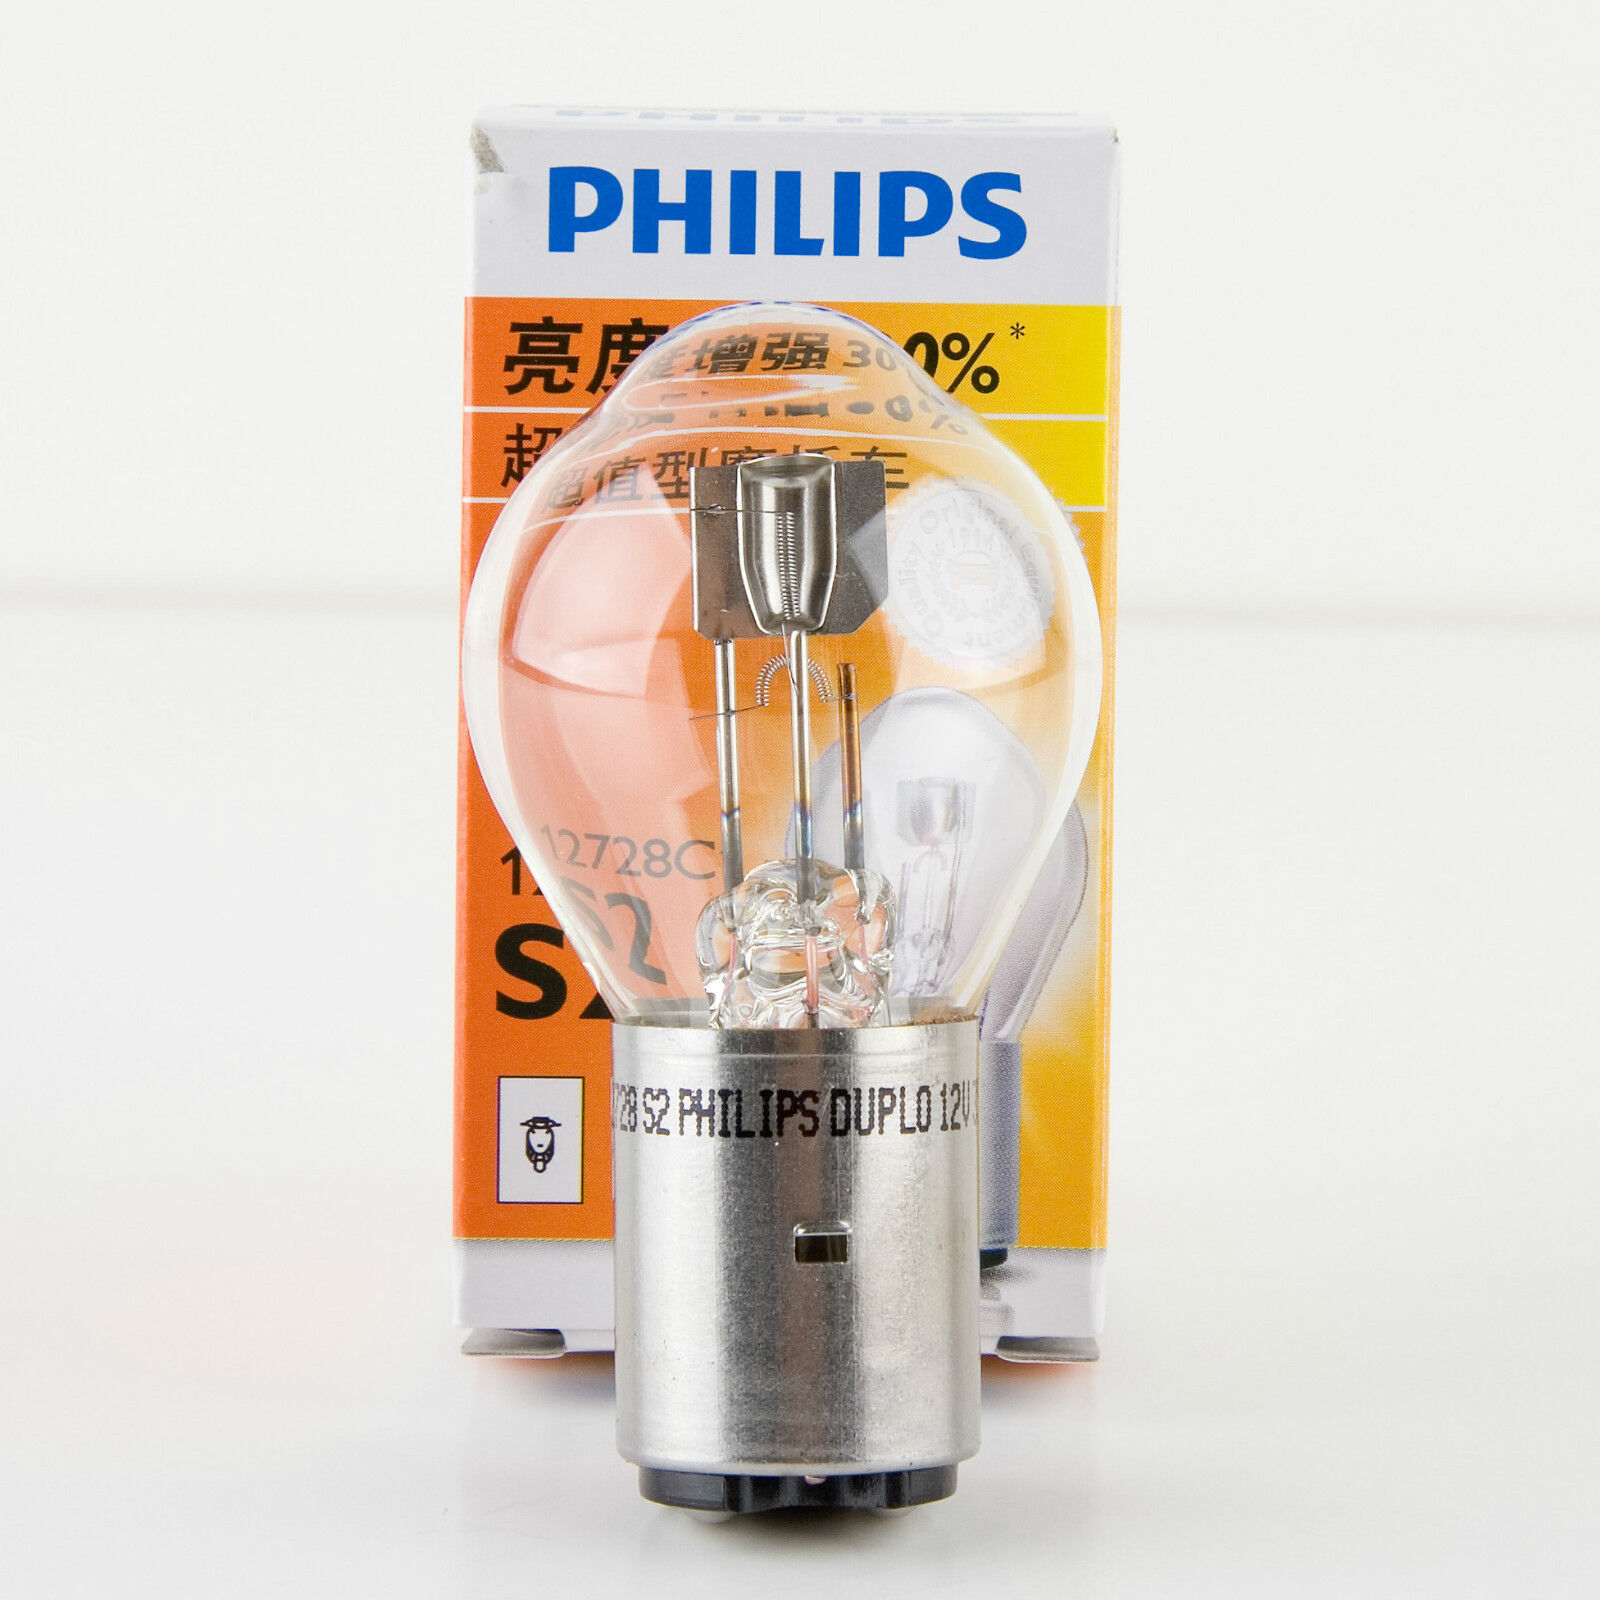 Philips Scooter Headlight Bulb S2 12V 35/35W BA20d - 30% Brighter than Stock